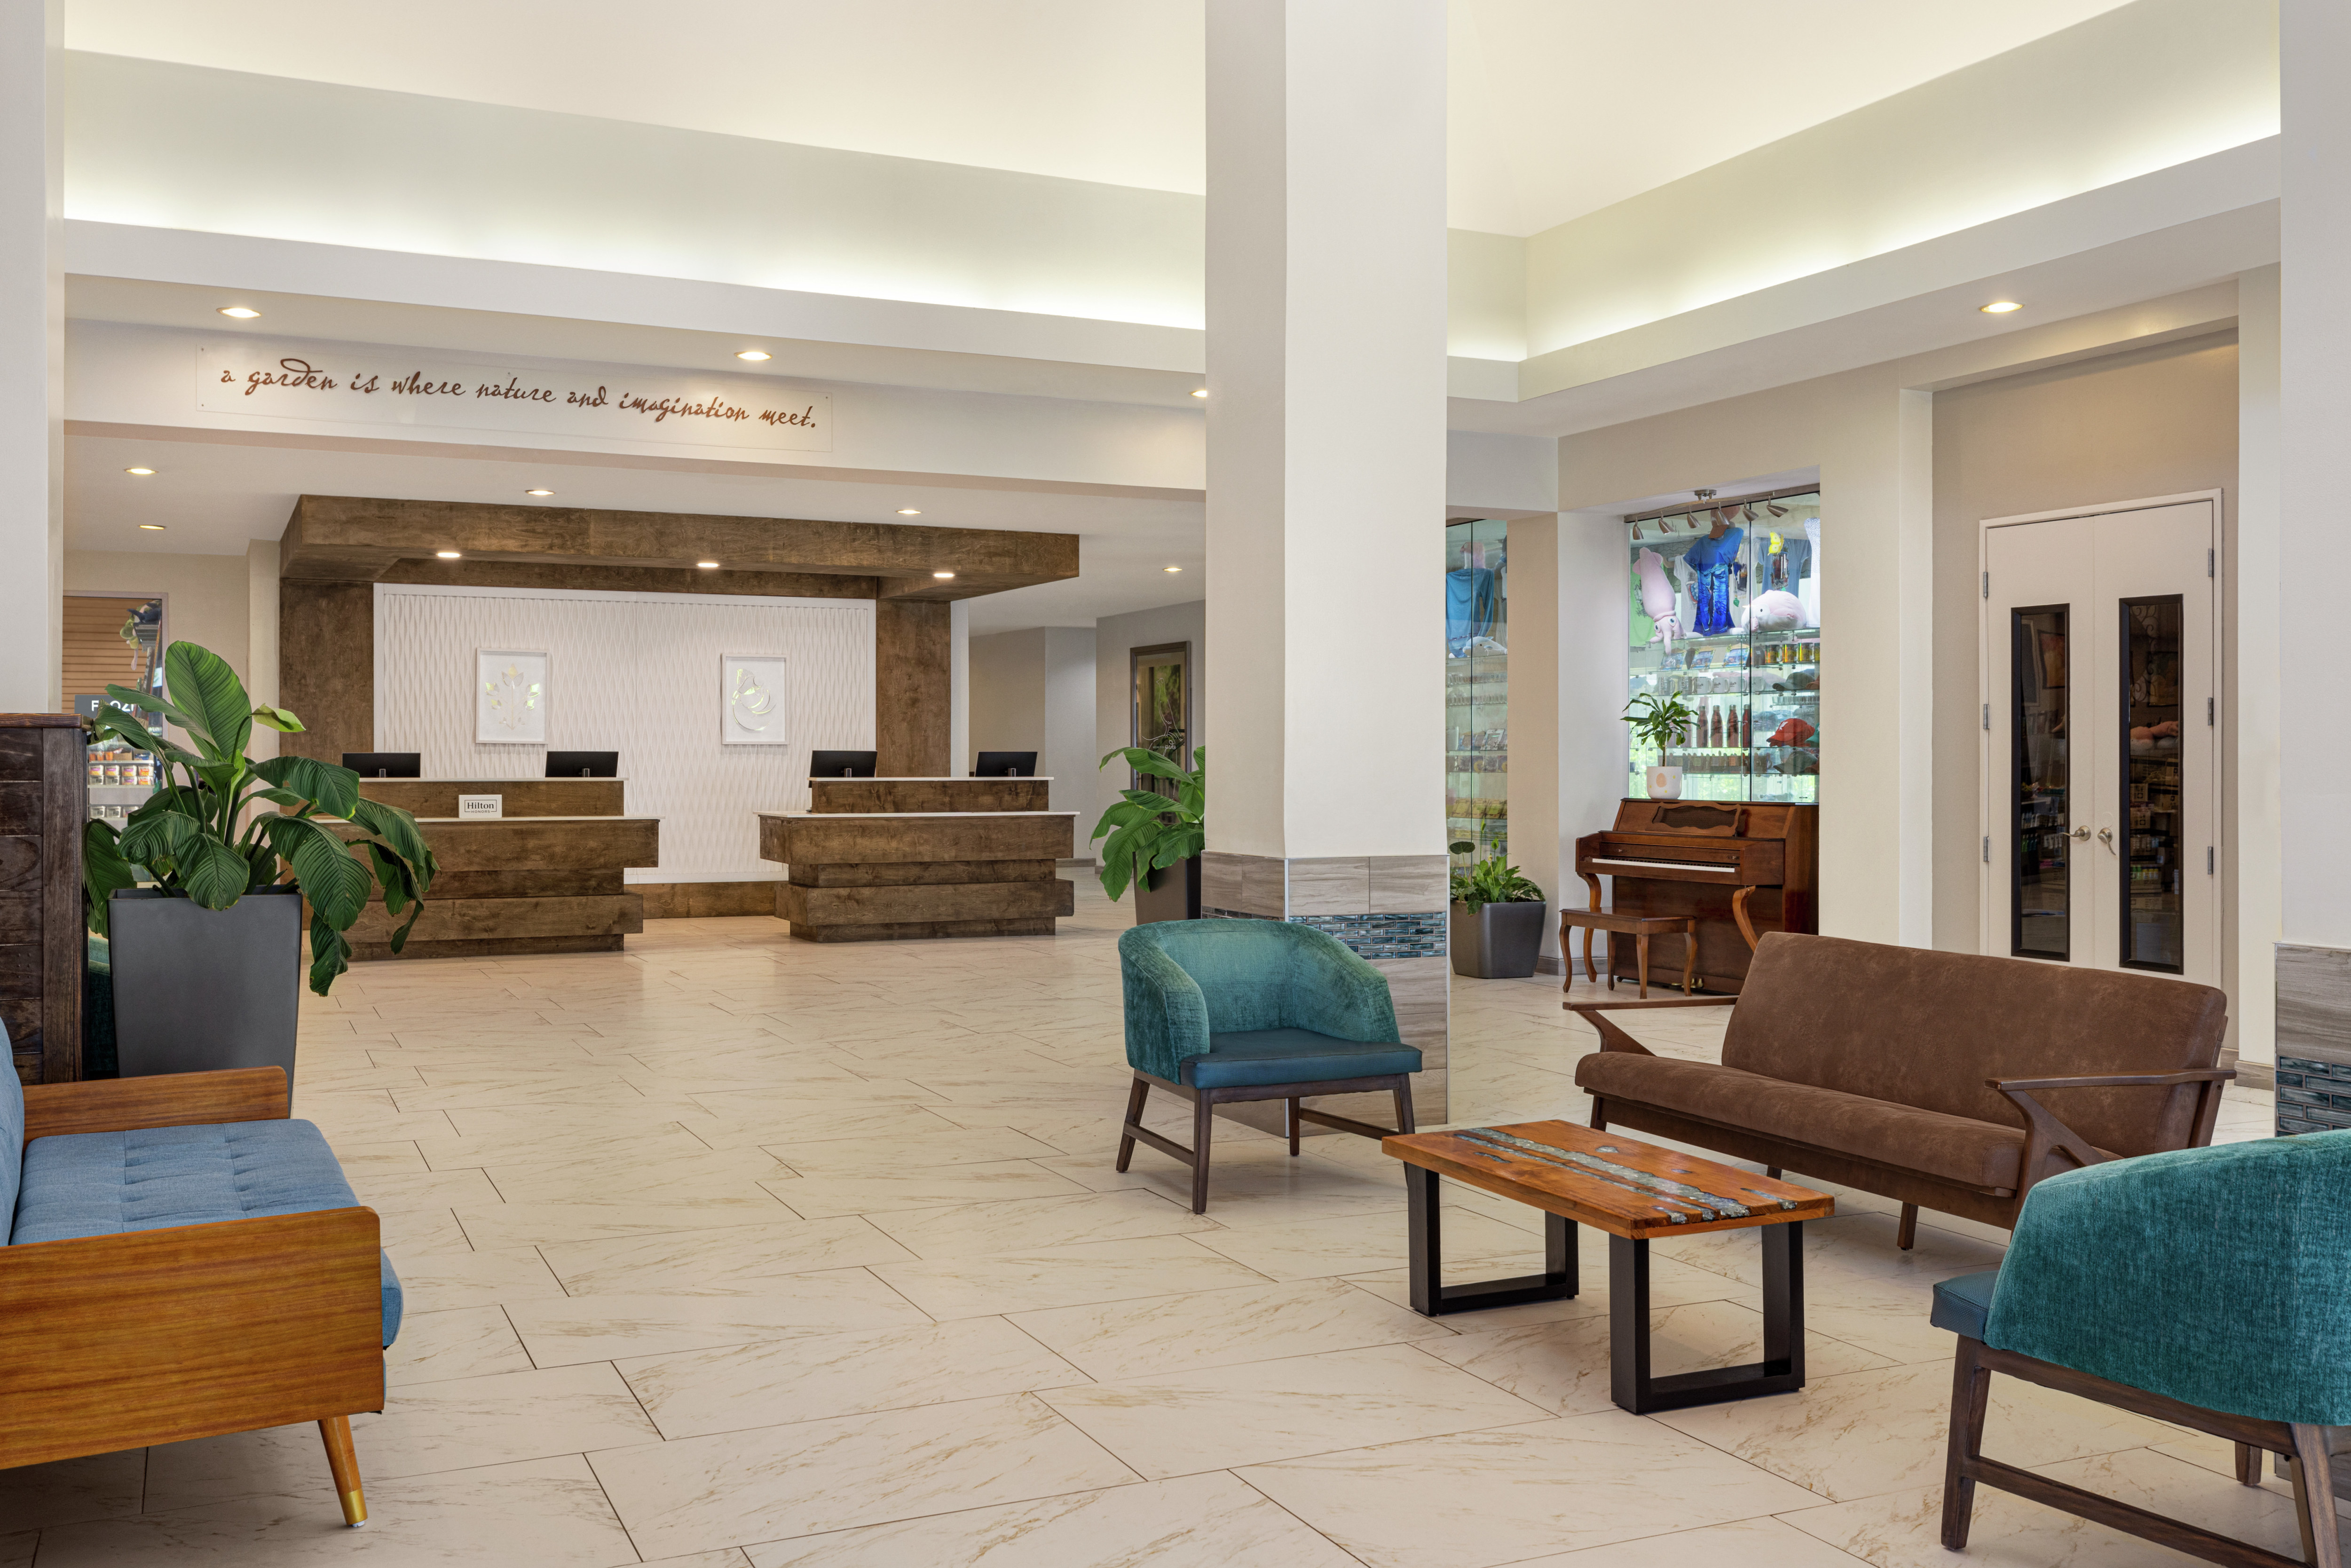 Spacious hotel lobby featuring ample comfortable seating, welcoming front desk, and convenient gift shop.